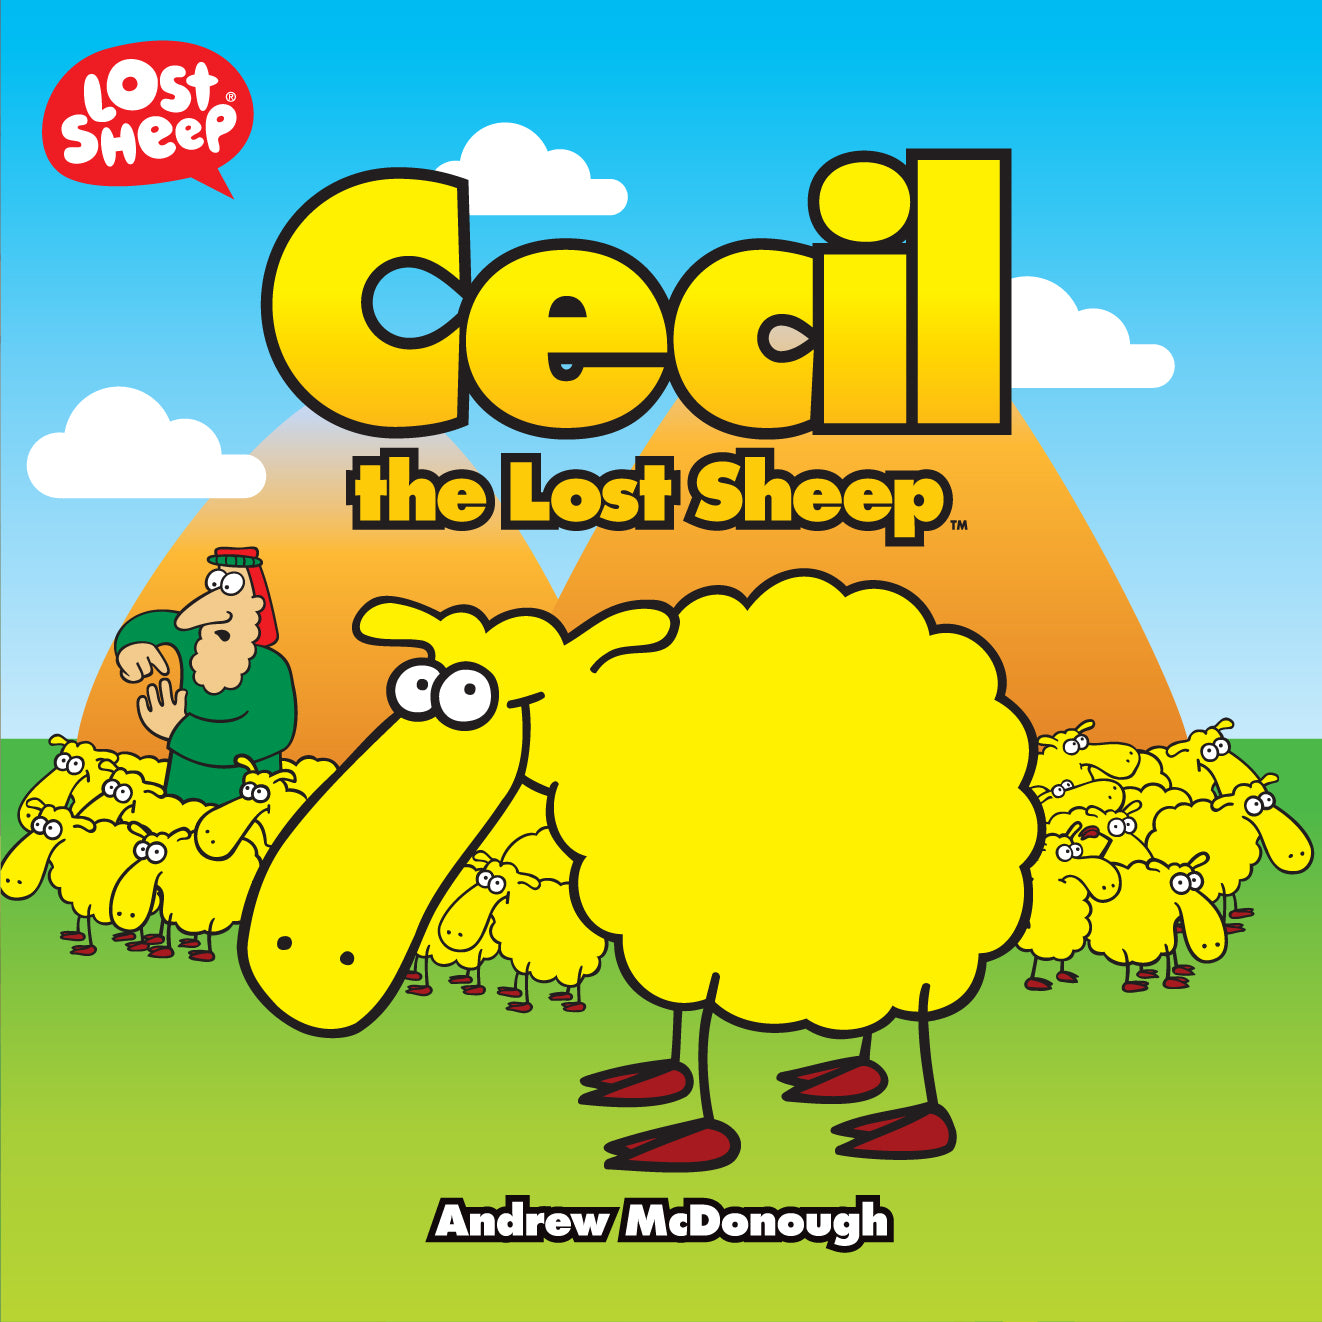 Image of Cecil the Lost Sheep other